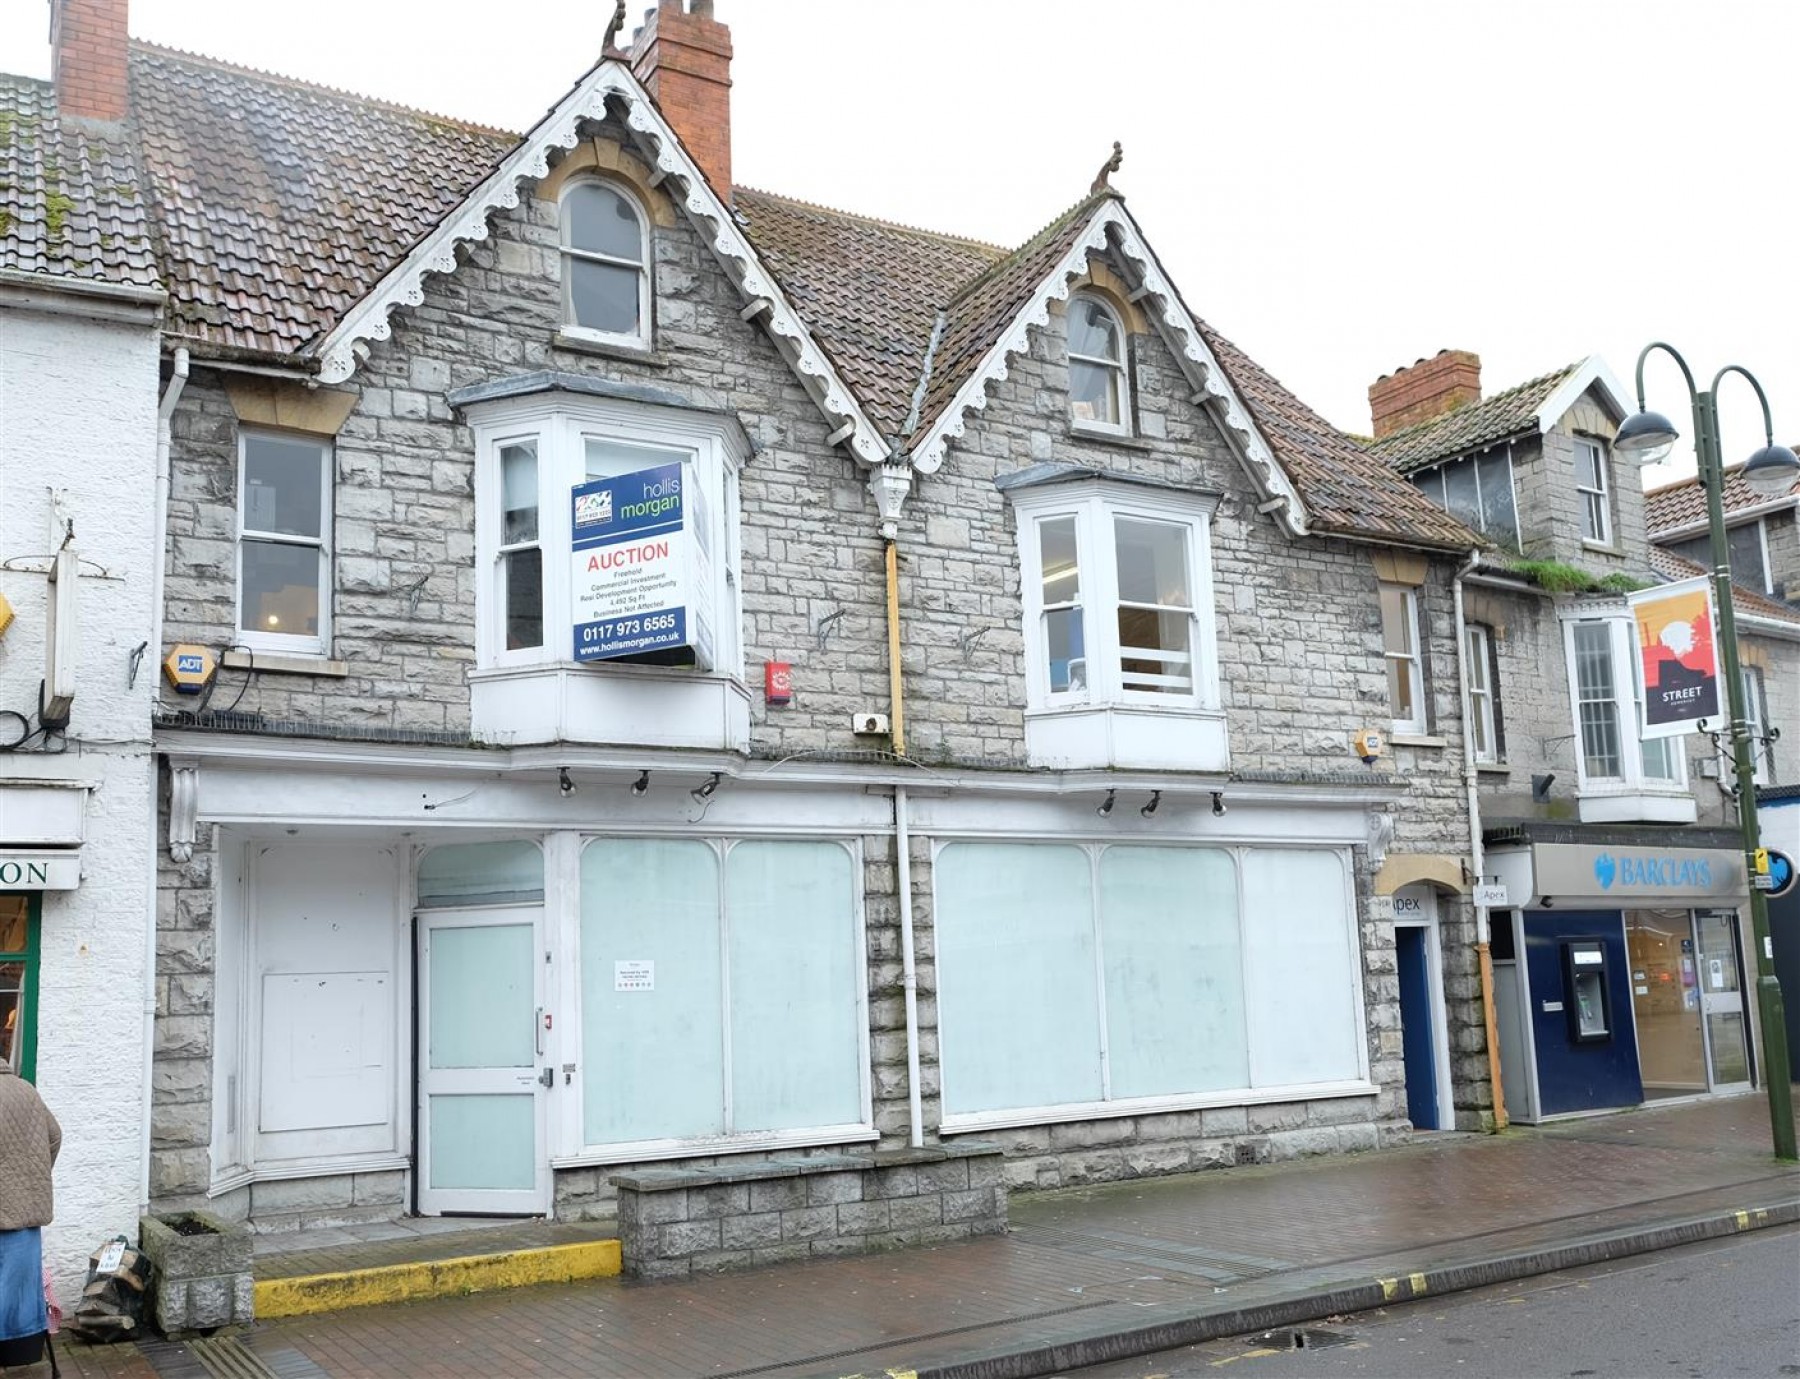 Images for 4492 Sq Ft / £49k pa, High Street, Street